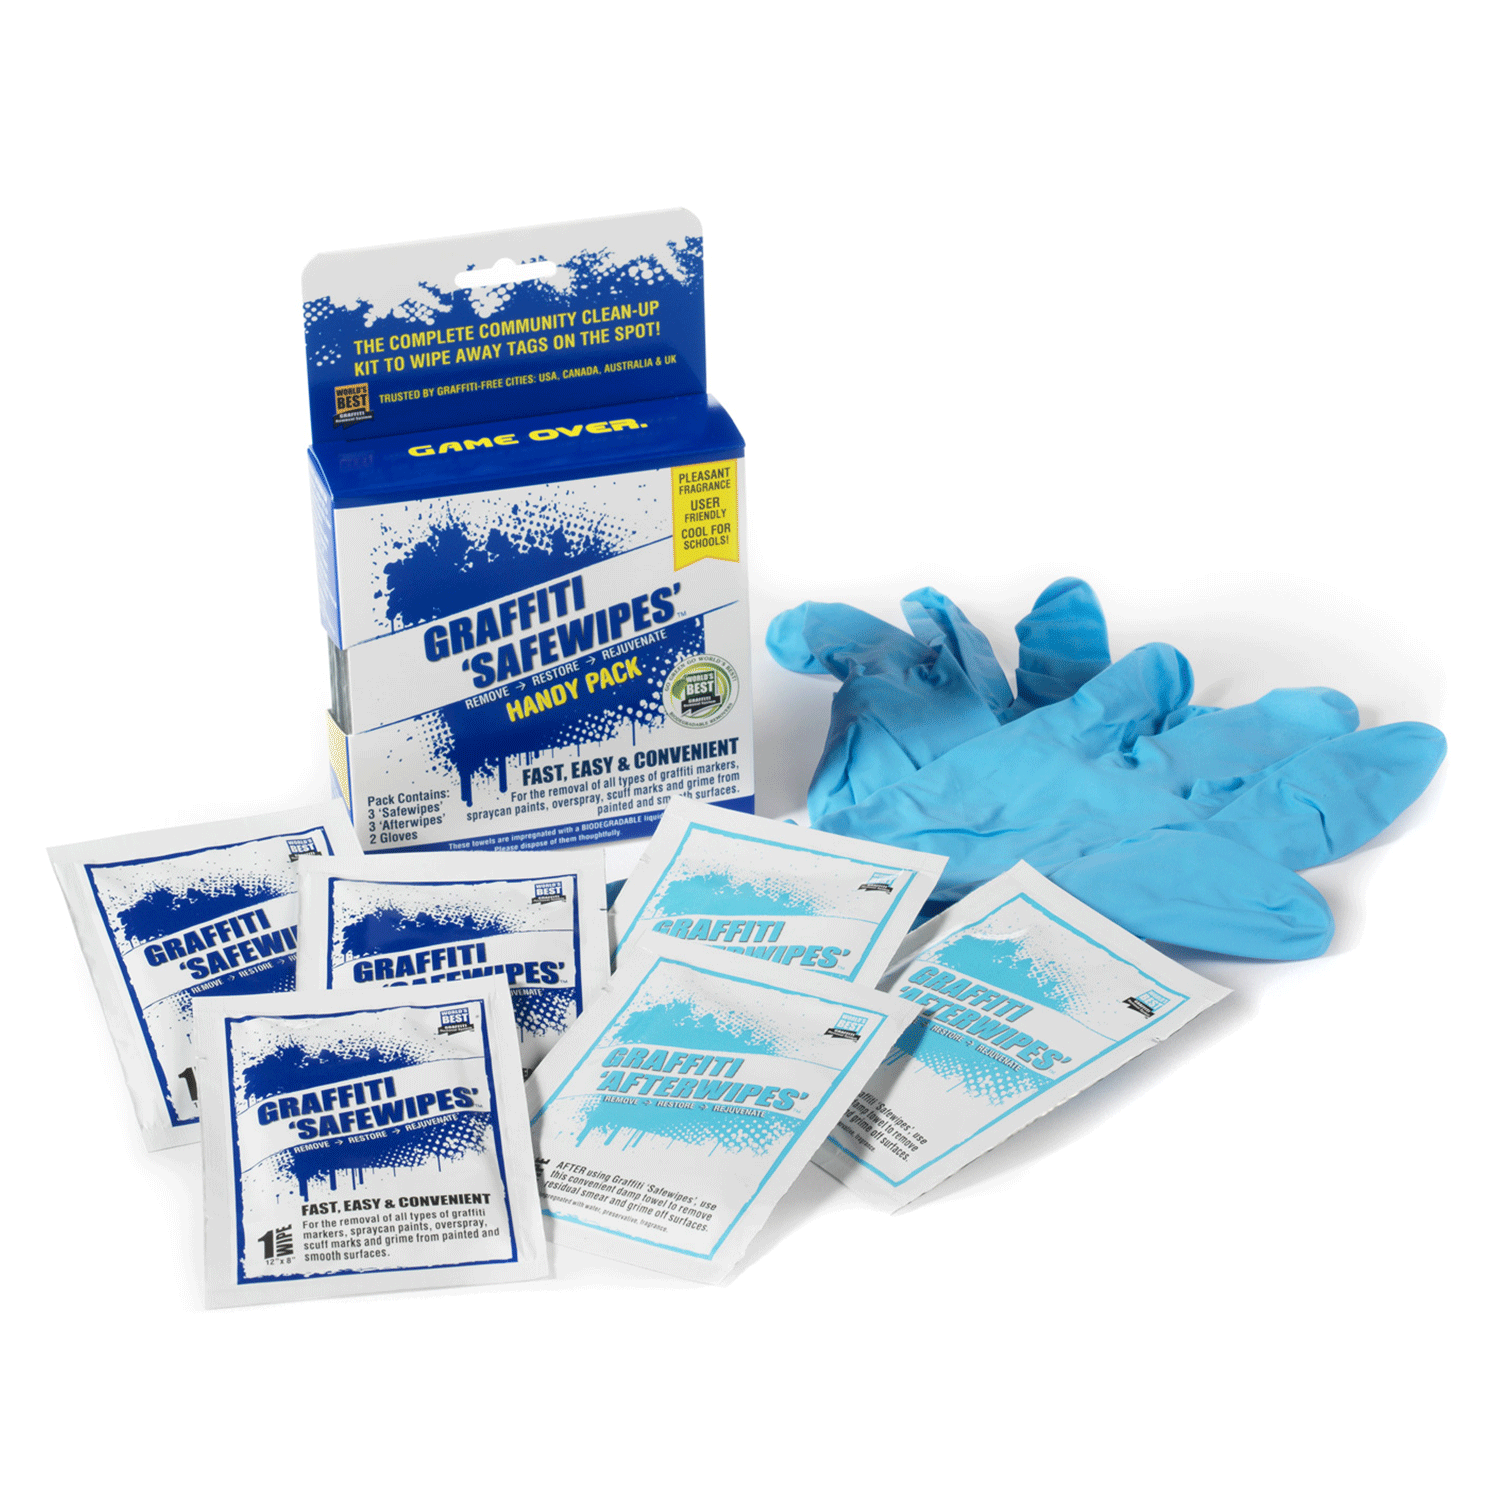 graffiti remover safewipes handy pack